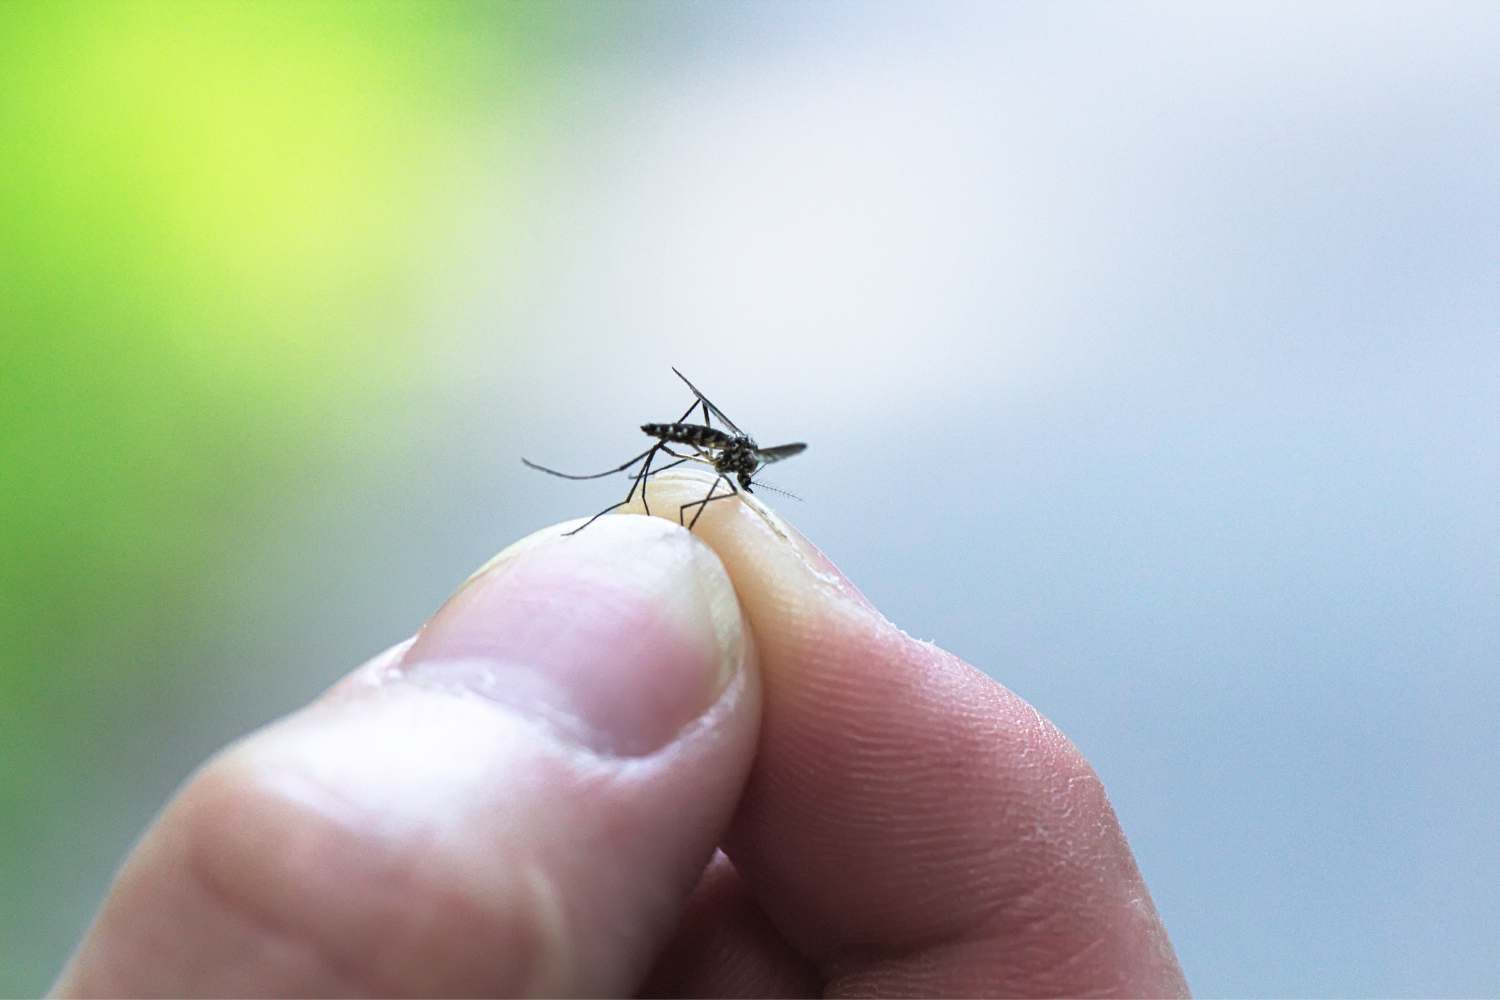 mosquito held between finger and thumb